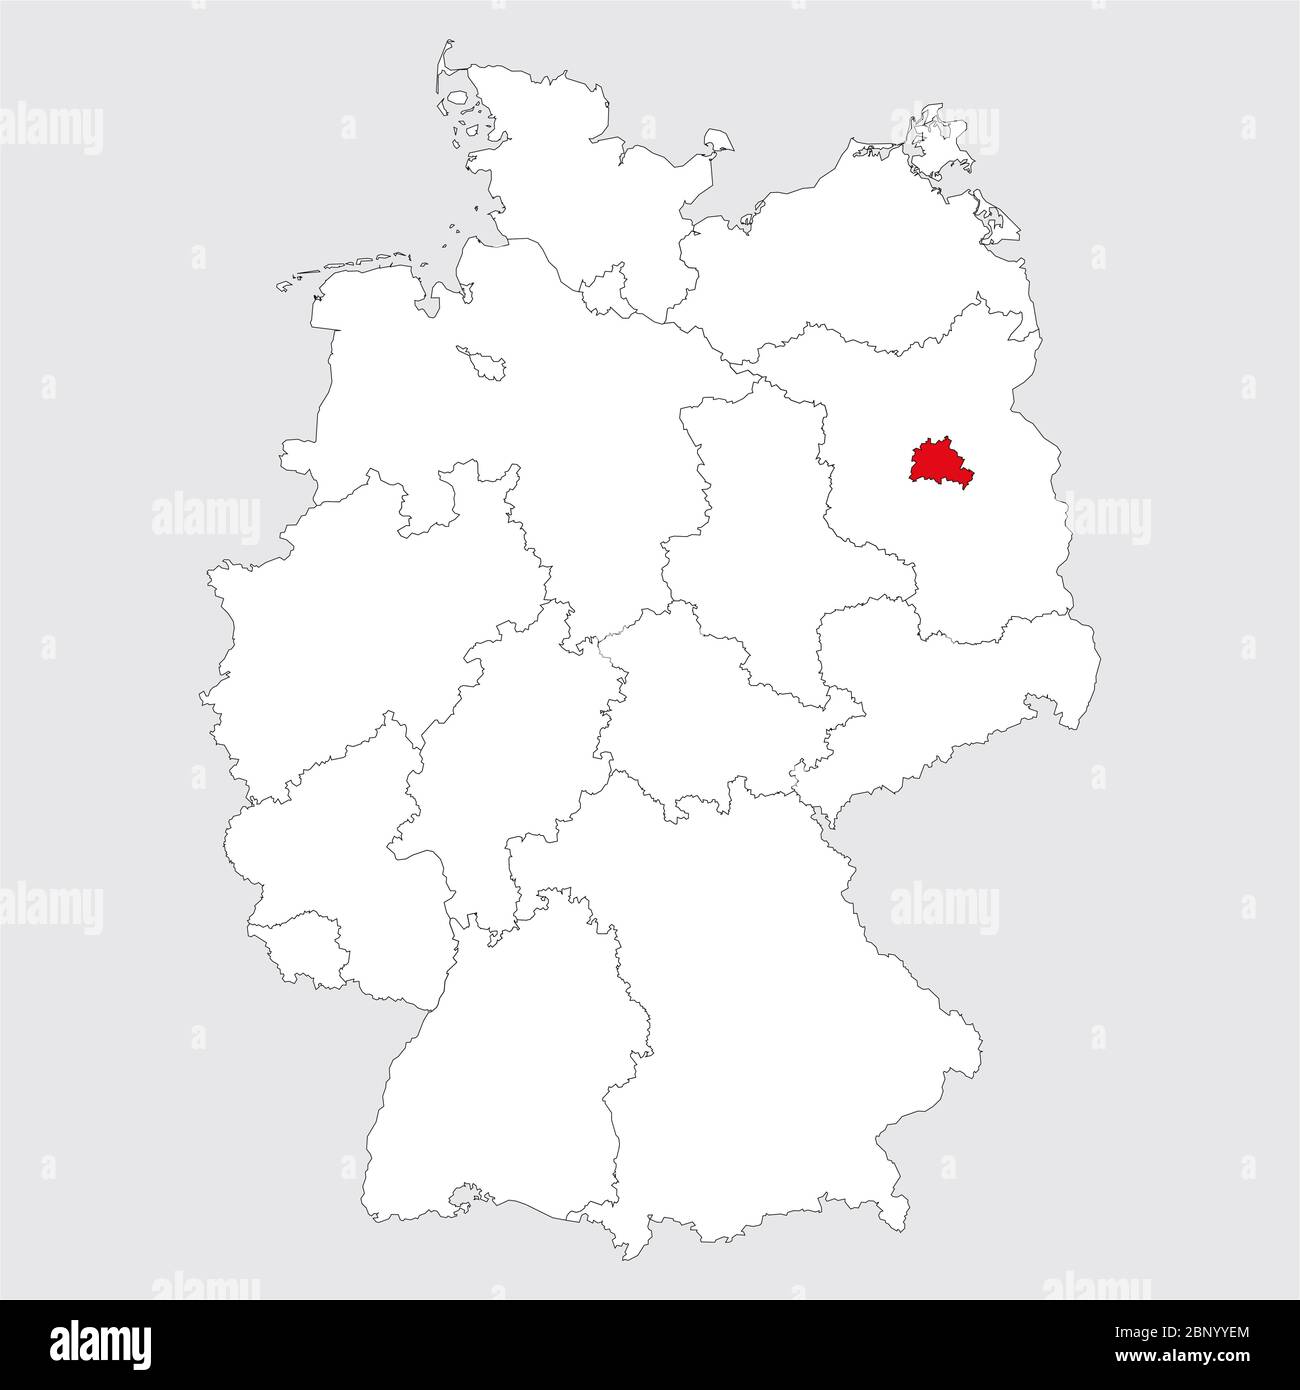 Berlin province highlighted on germany map. Gray background. German political map. Stock Vector